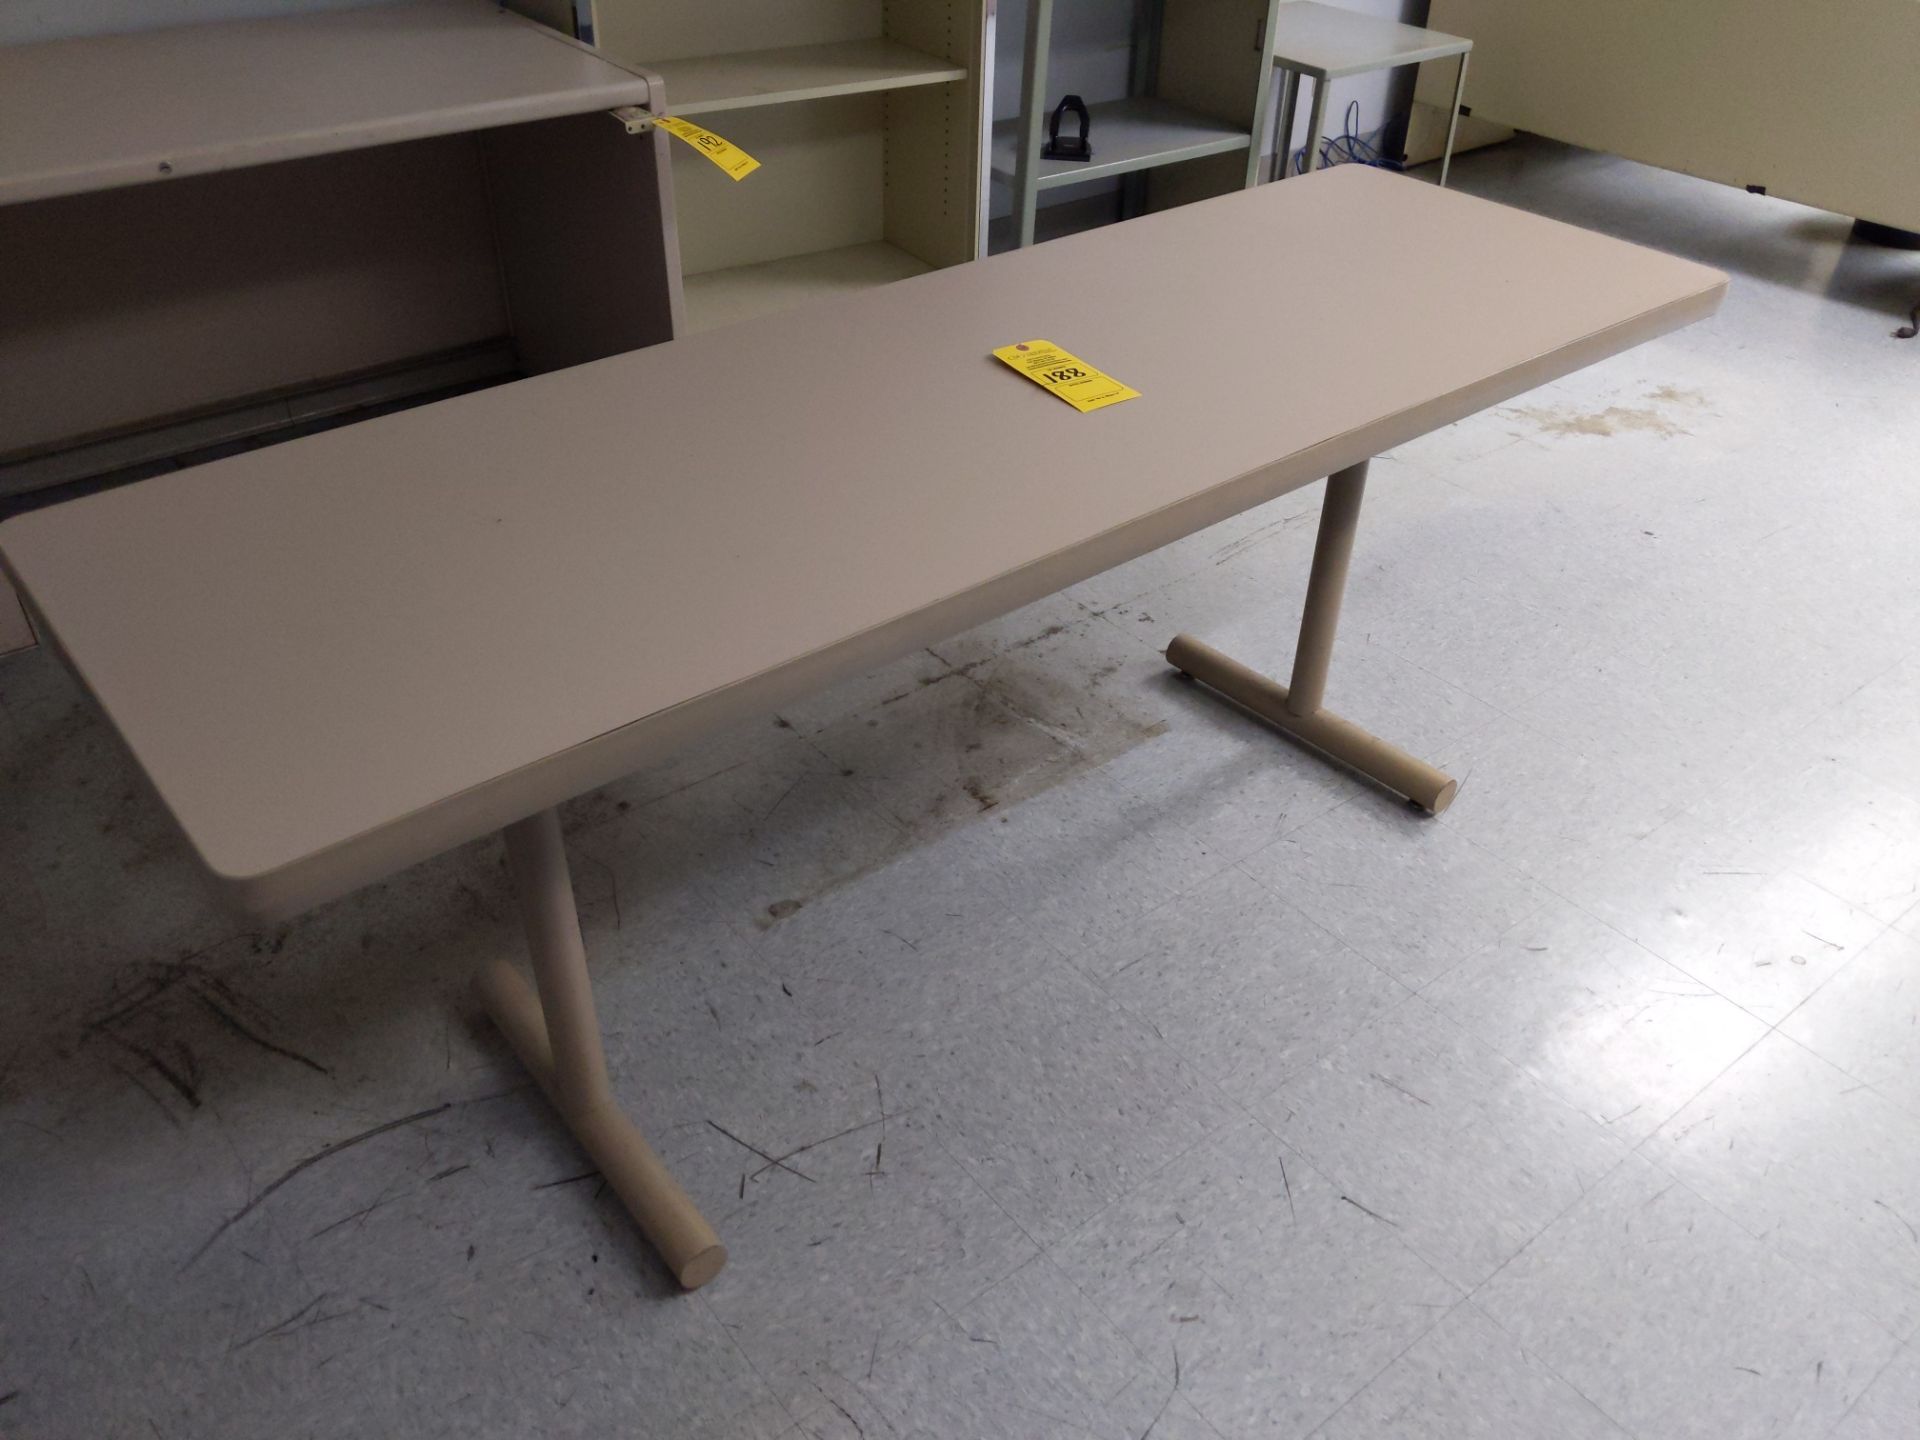 6' X 2' TABLE